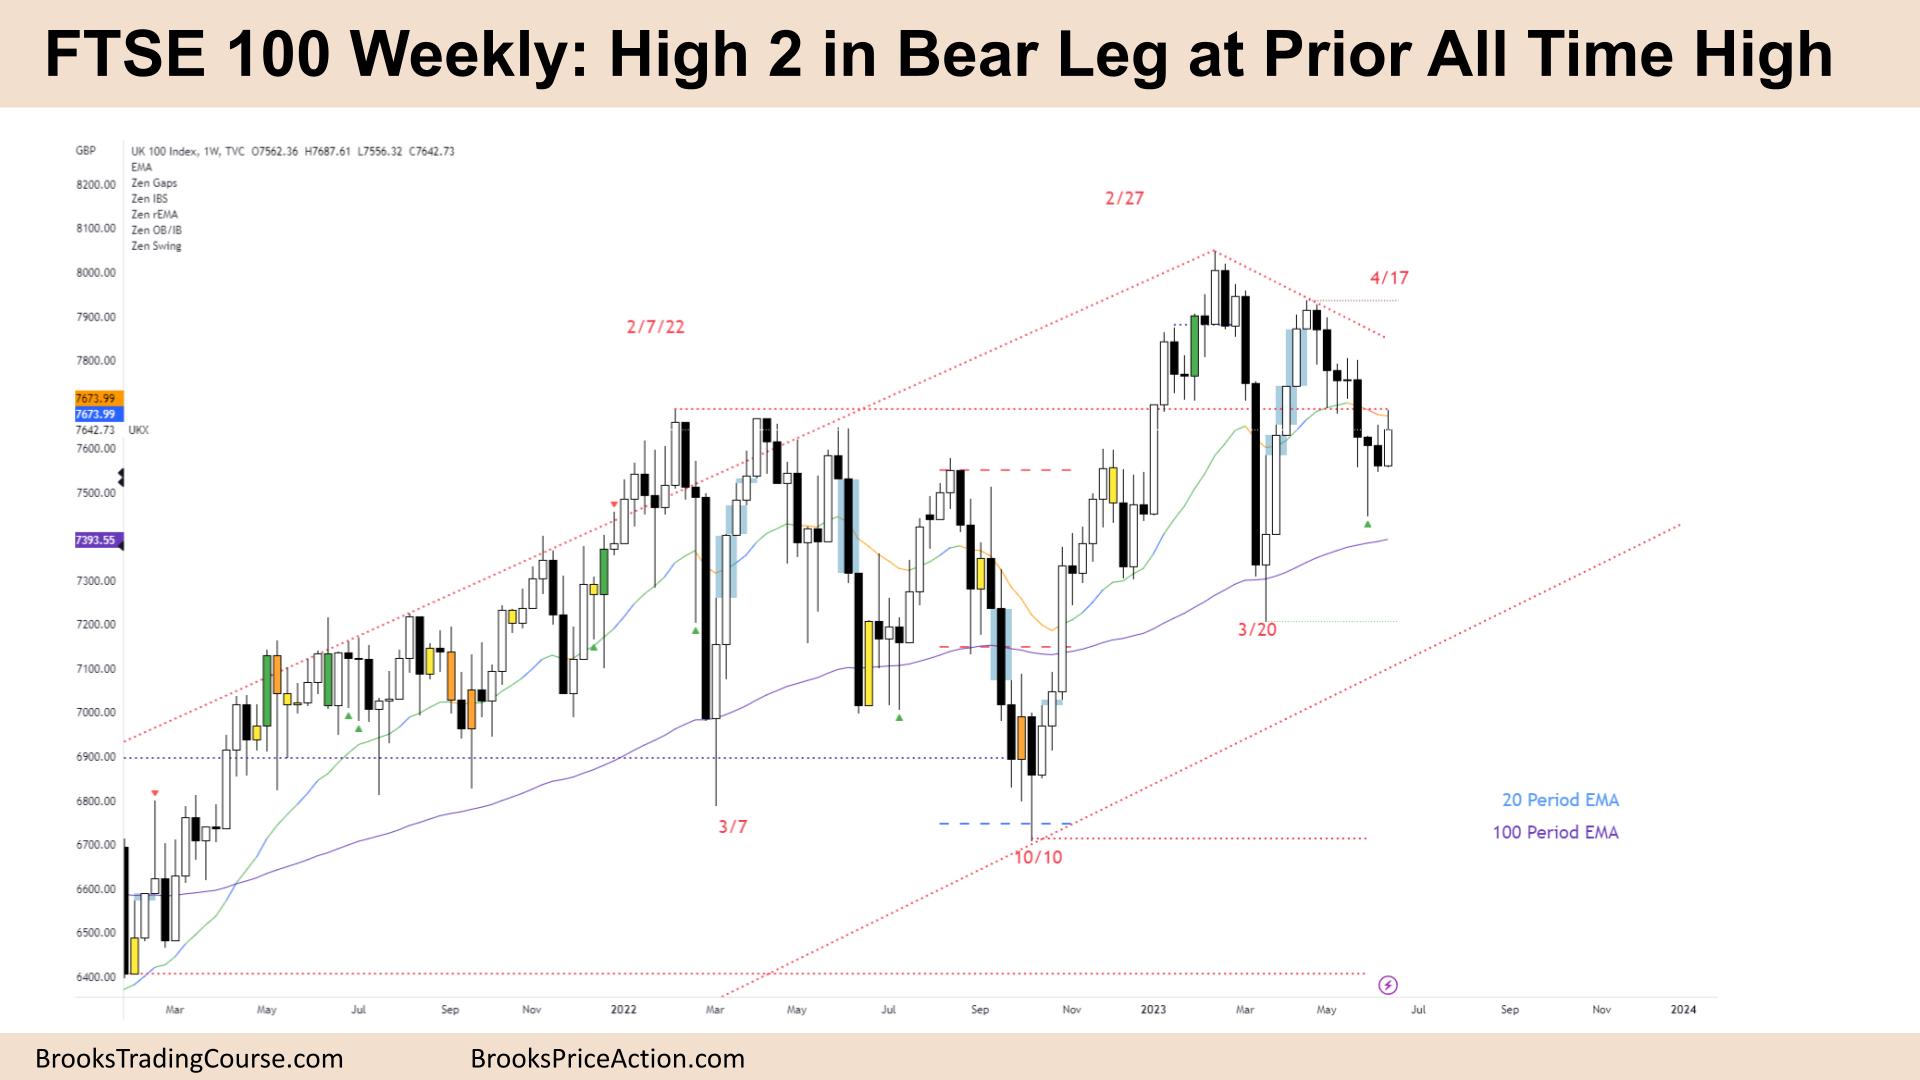 FTSE 100 High 2 in Bear Leg at Prior All Time High